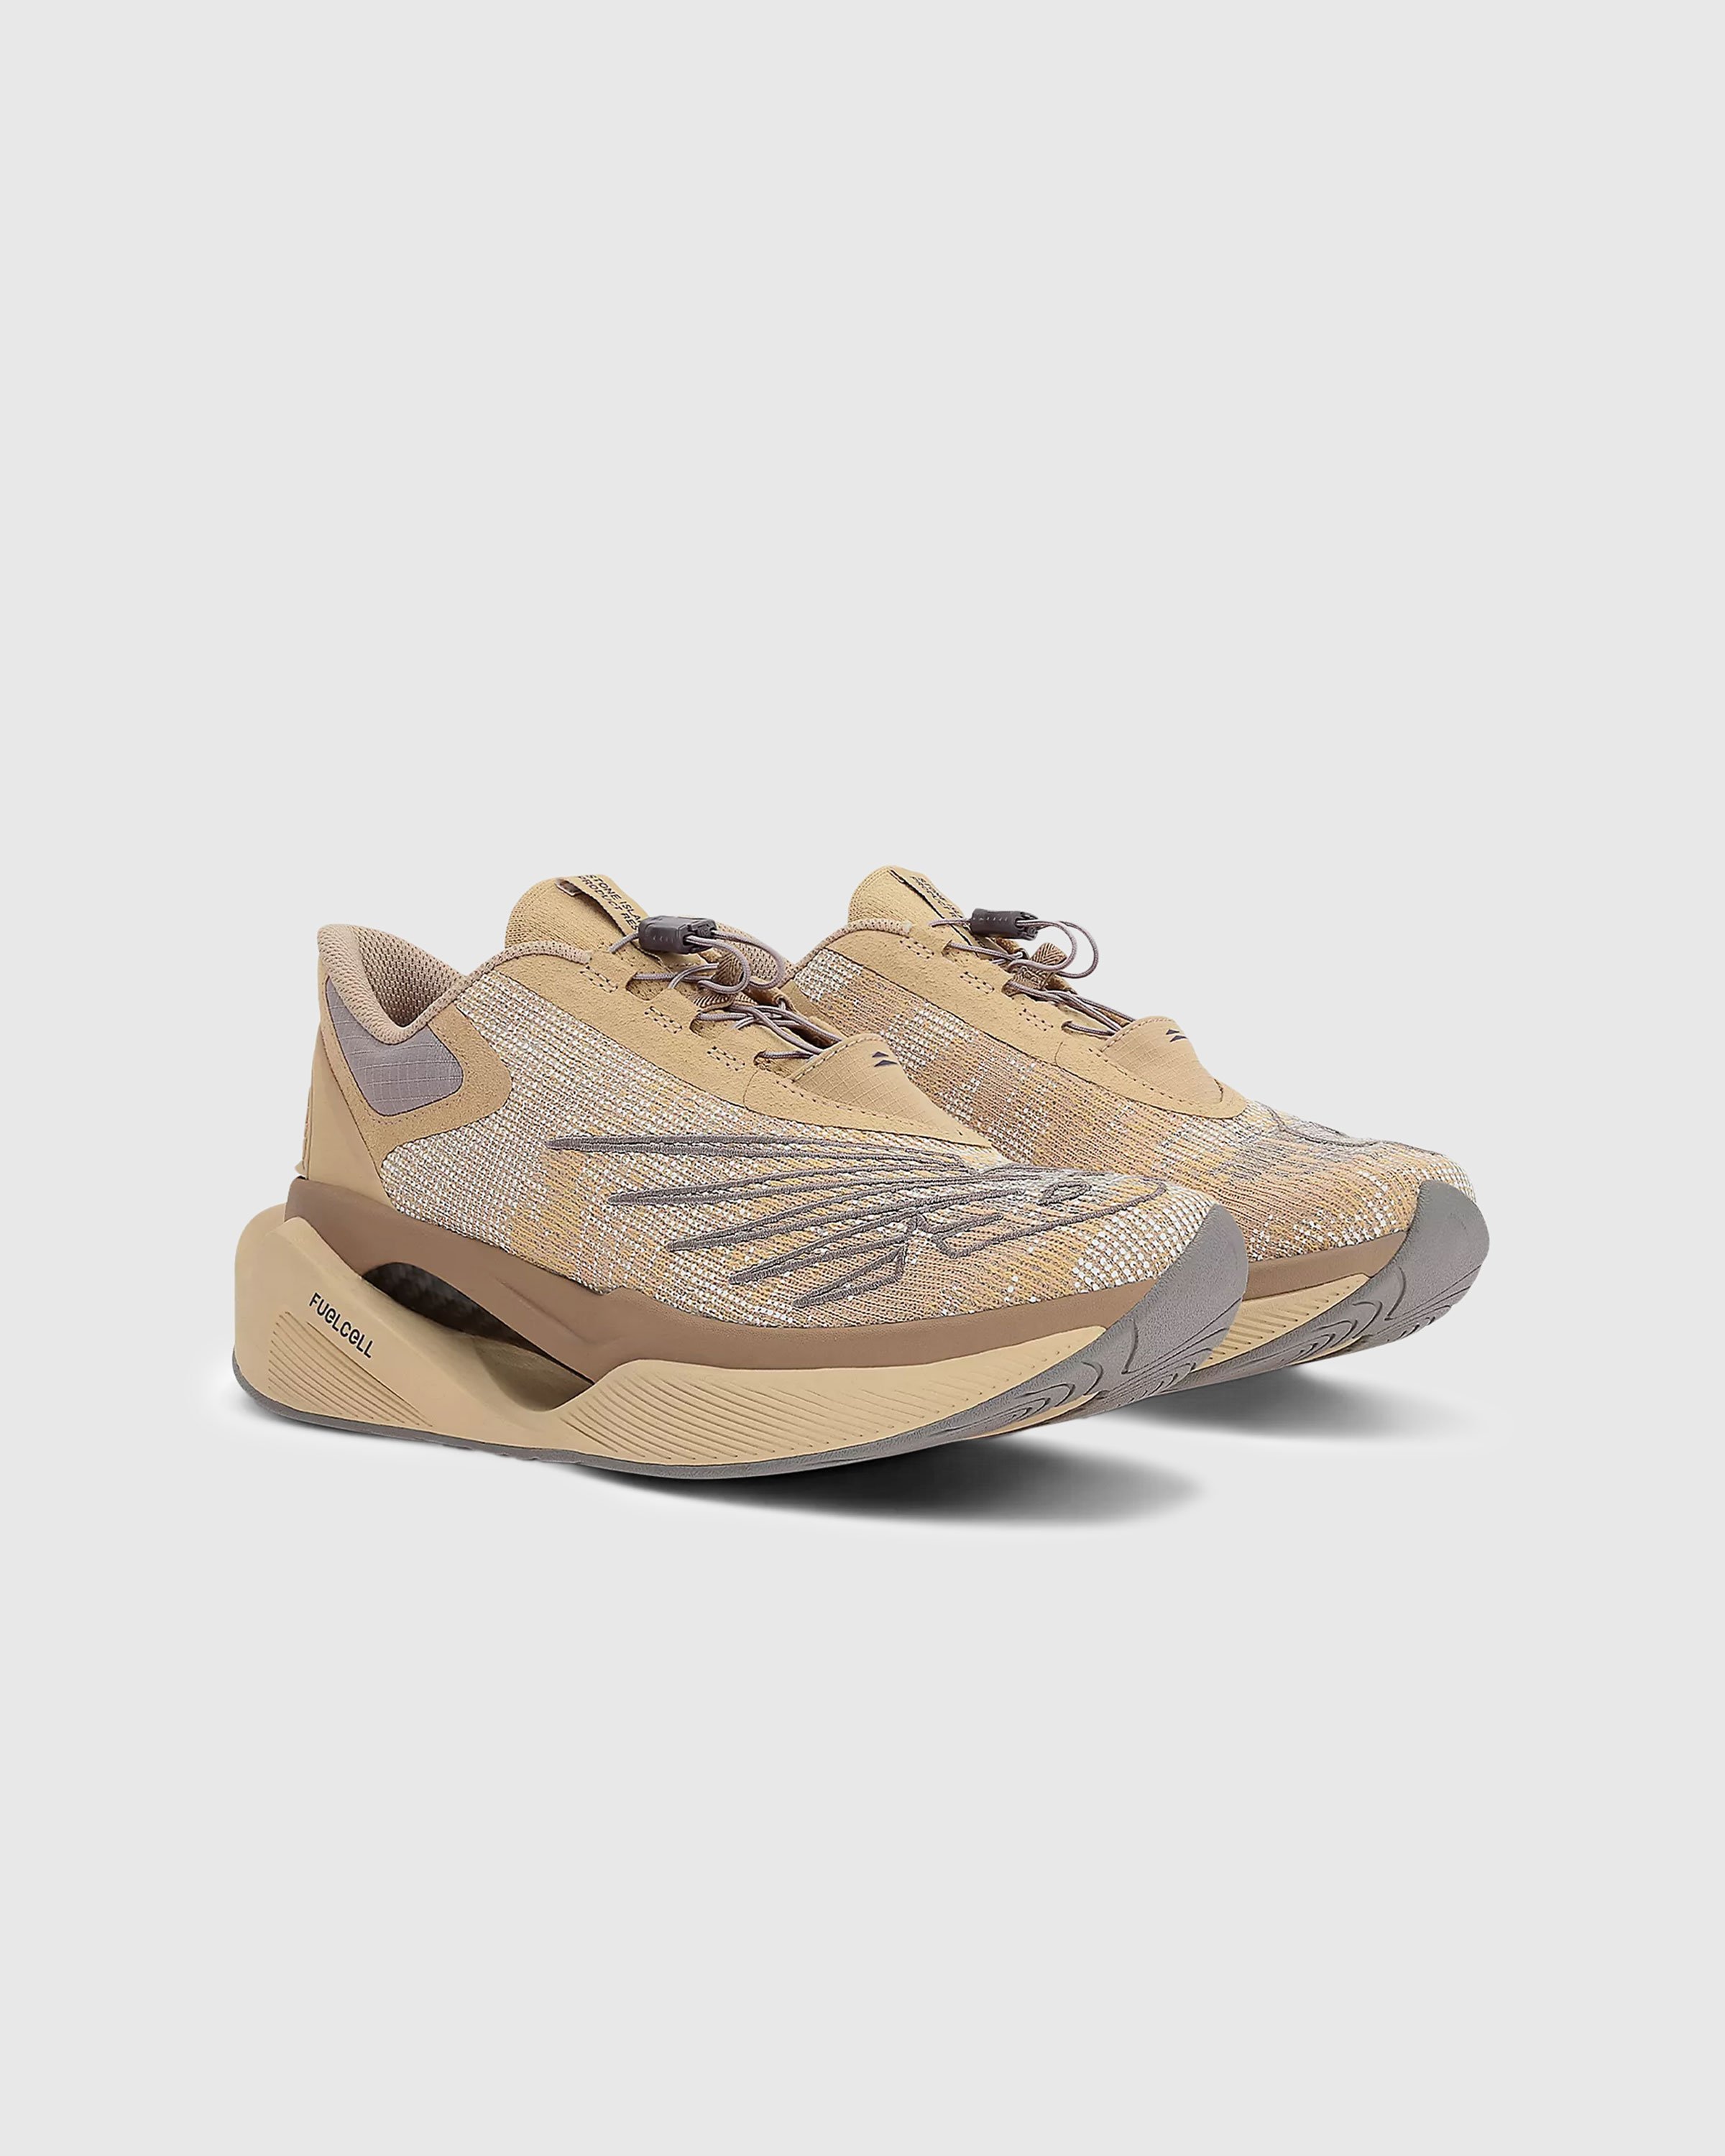 New Balance x Stone Island - TDS FuelCell C_1 Tan/Brown/Grey - Footwear - Brown - Image 3